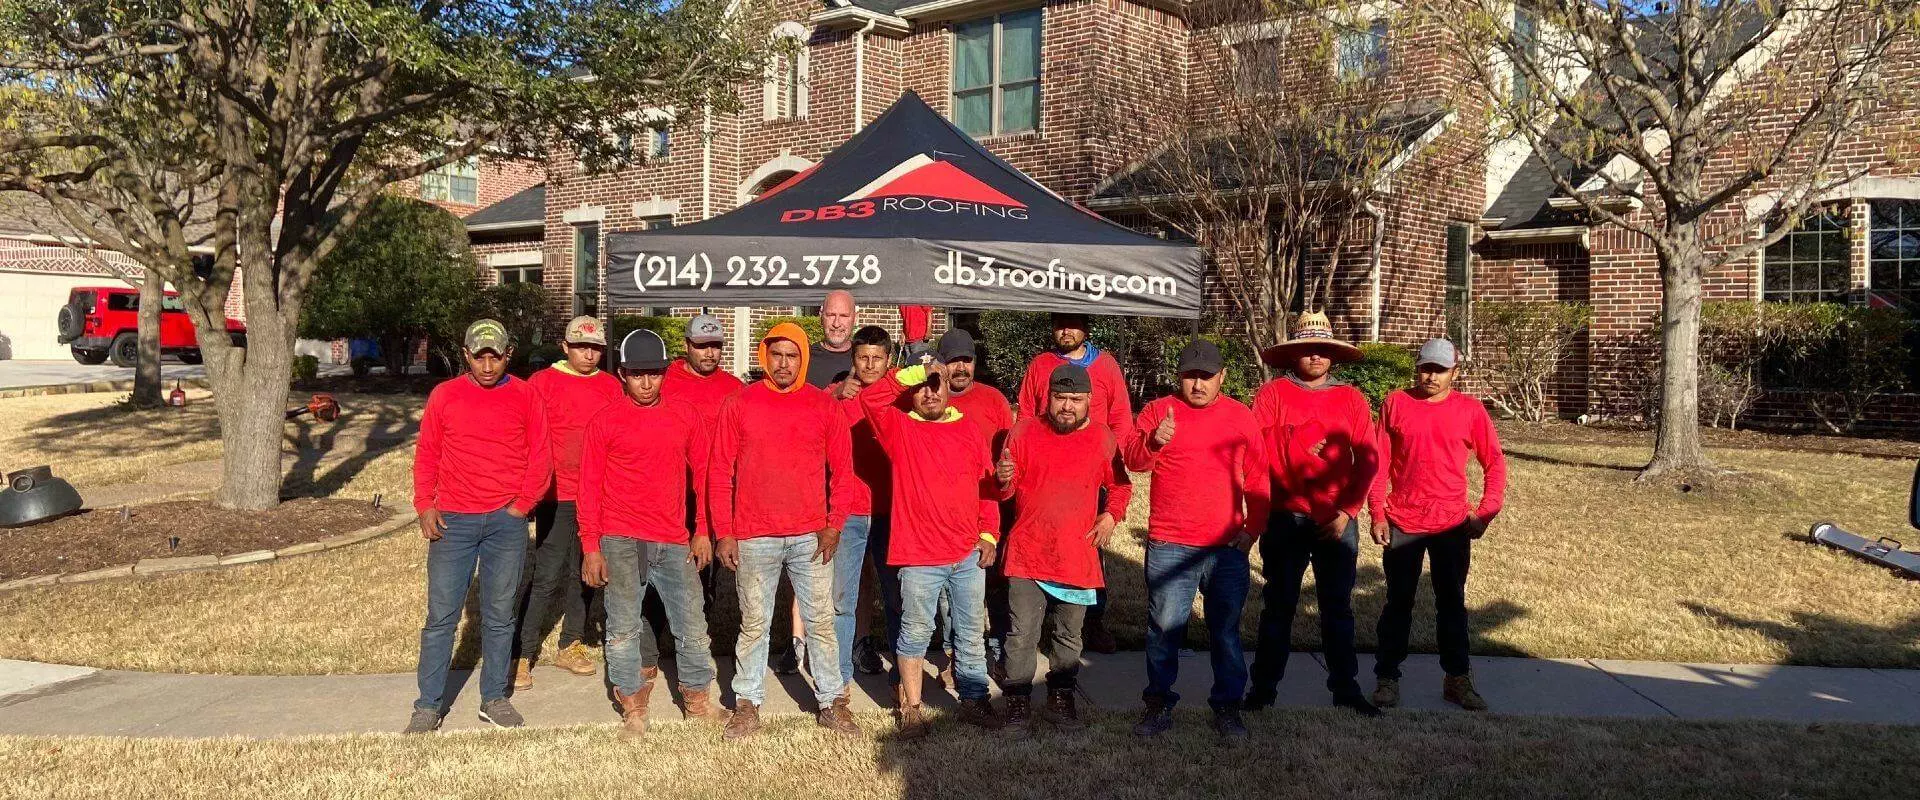 DB3 Roofing Specializes in Many Roof Styles and Installations